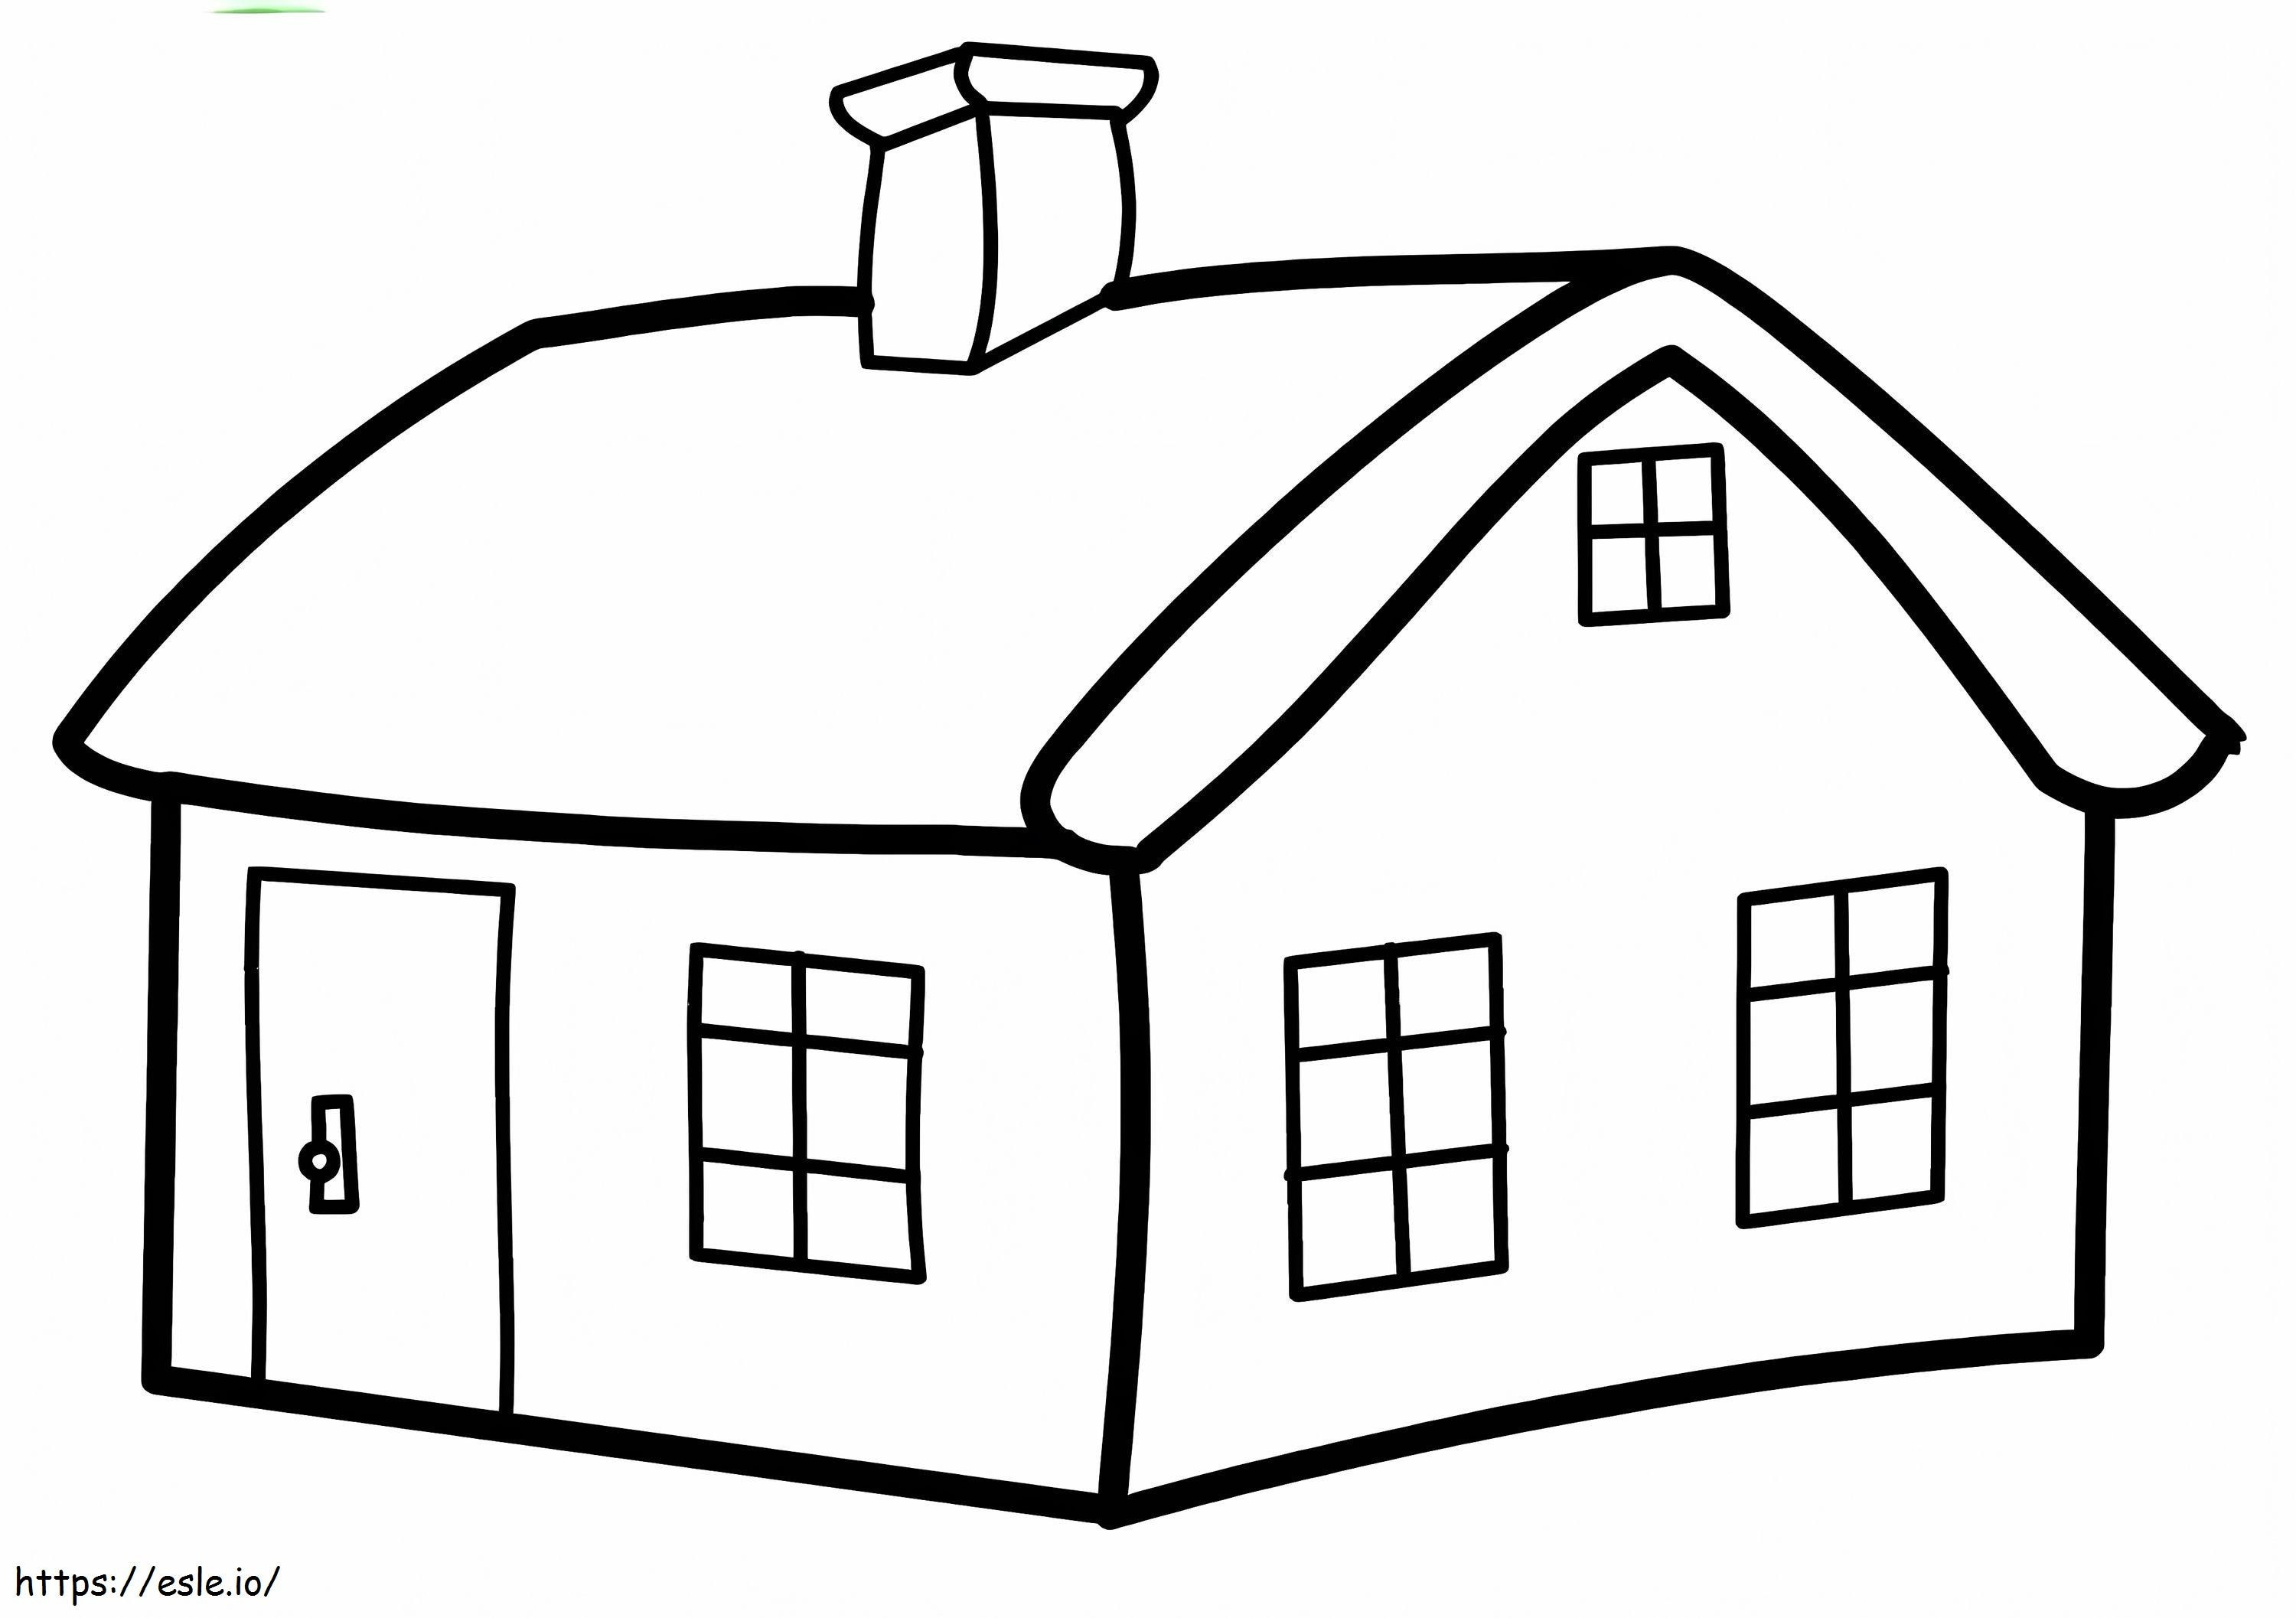 House 3 coloring page